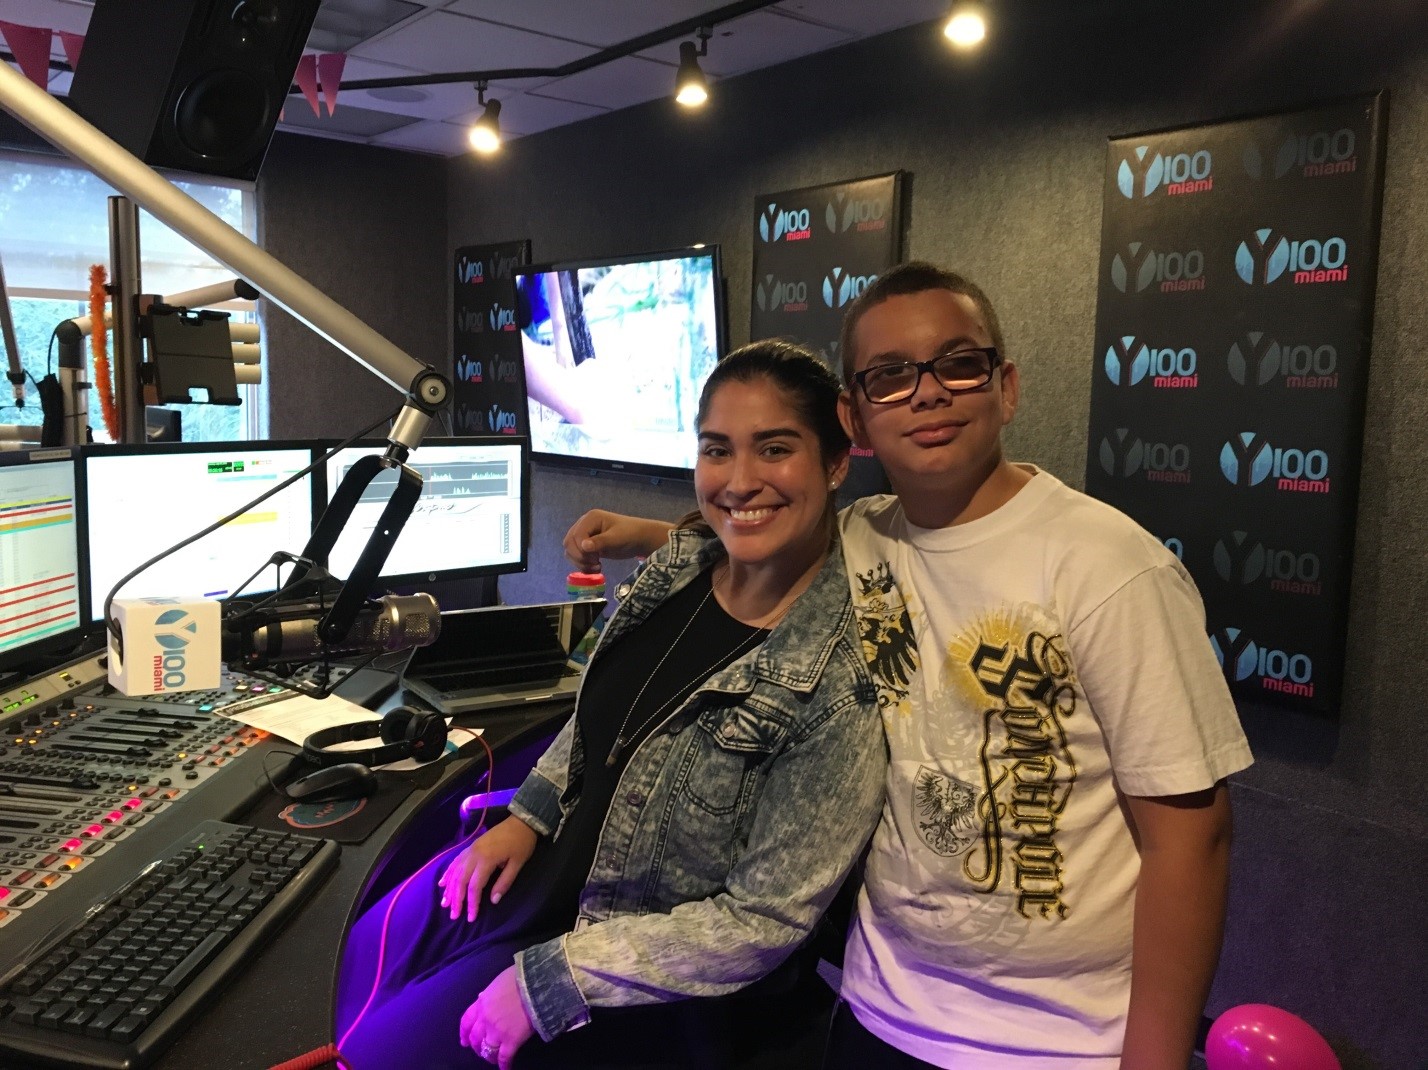 Pre-Employment Transition student Christian with Michelle Fay during a visit to Y100 Miami